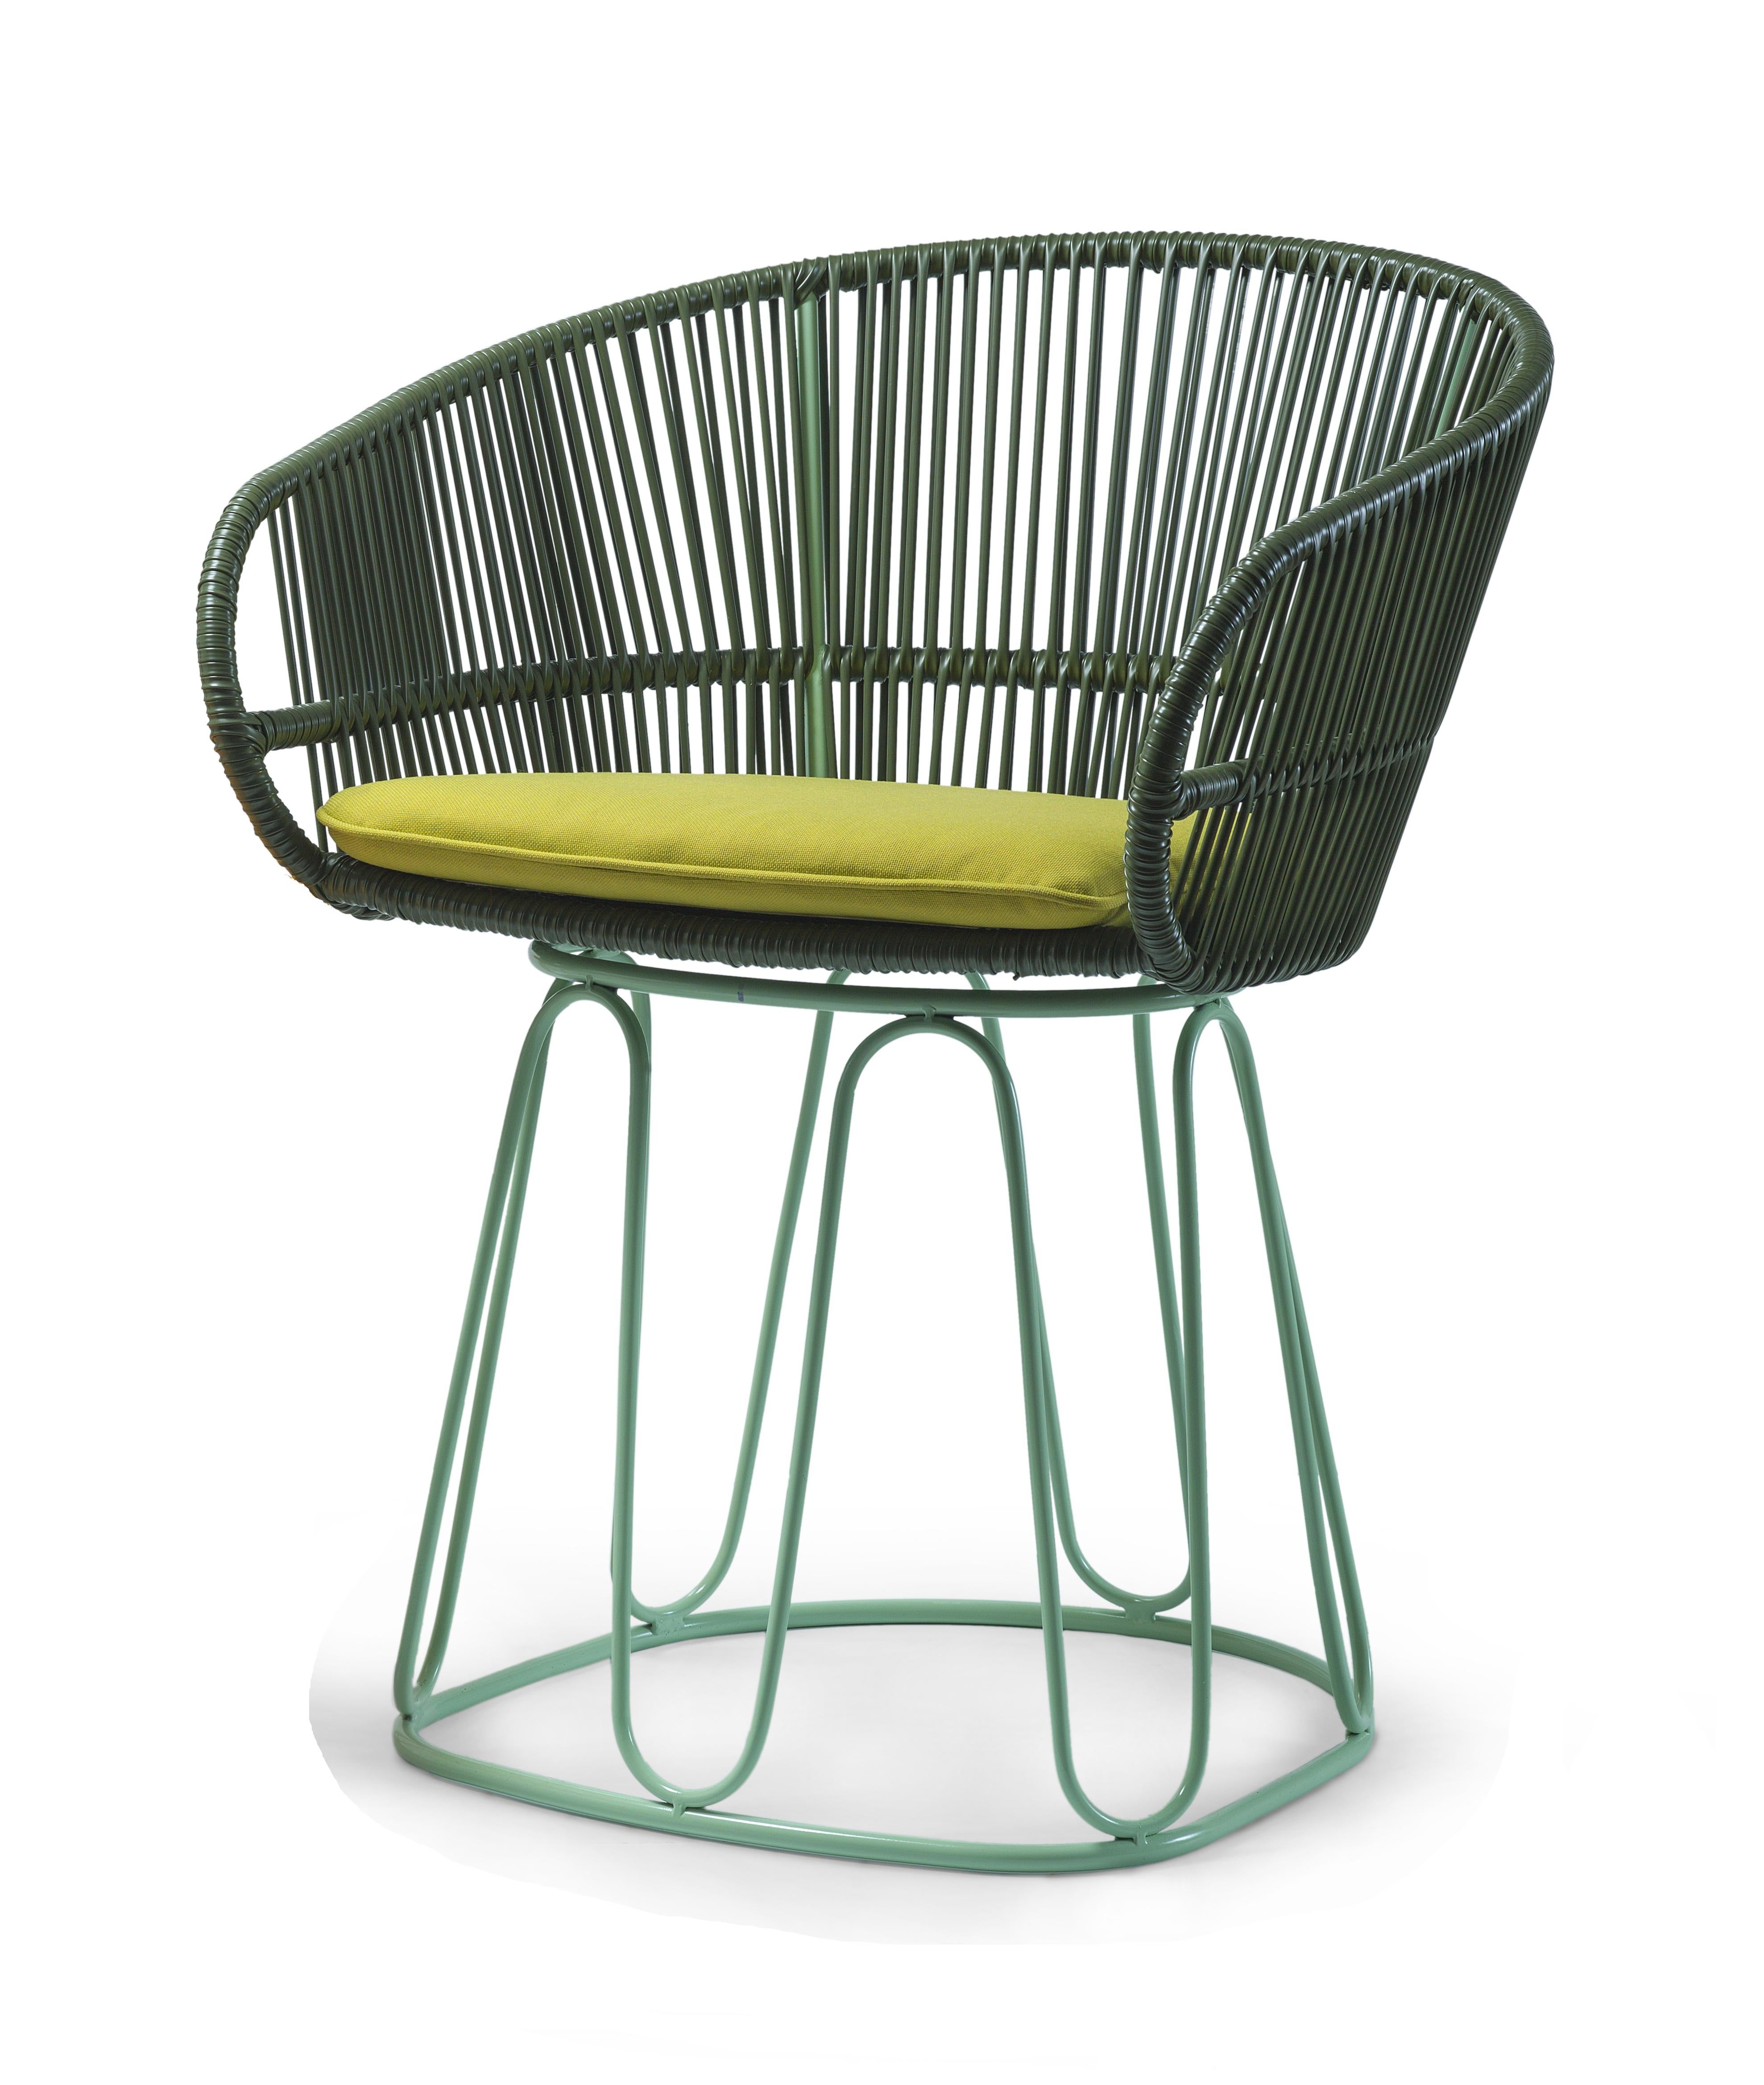 Set of 2 olive circo dining chair by Sebastian Herkner
Materials: Galvanized and powder-coated tubular steel. PVC strings.
Technique: Made from recycled plastic. Weaved by local craftspeople in Colombia. 
Dimensions: W 61.5 x D 56.5 x H 77.5 cm